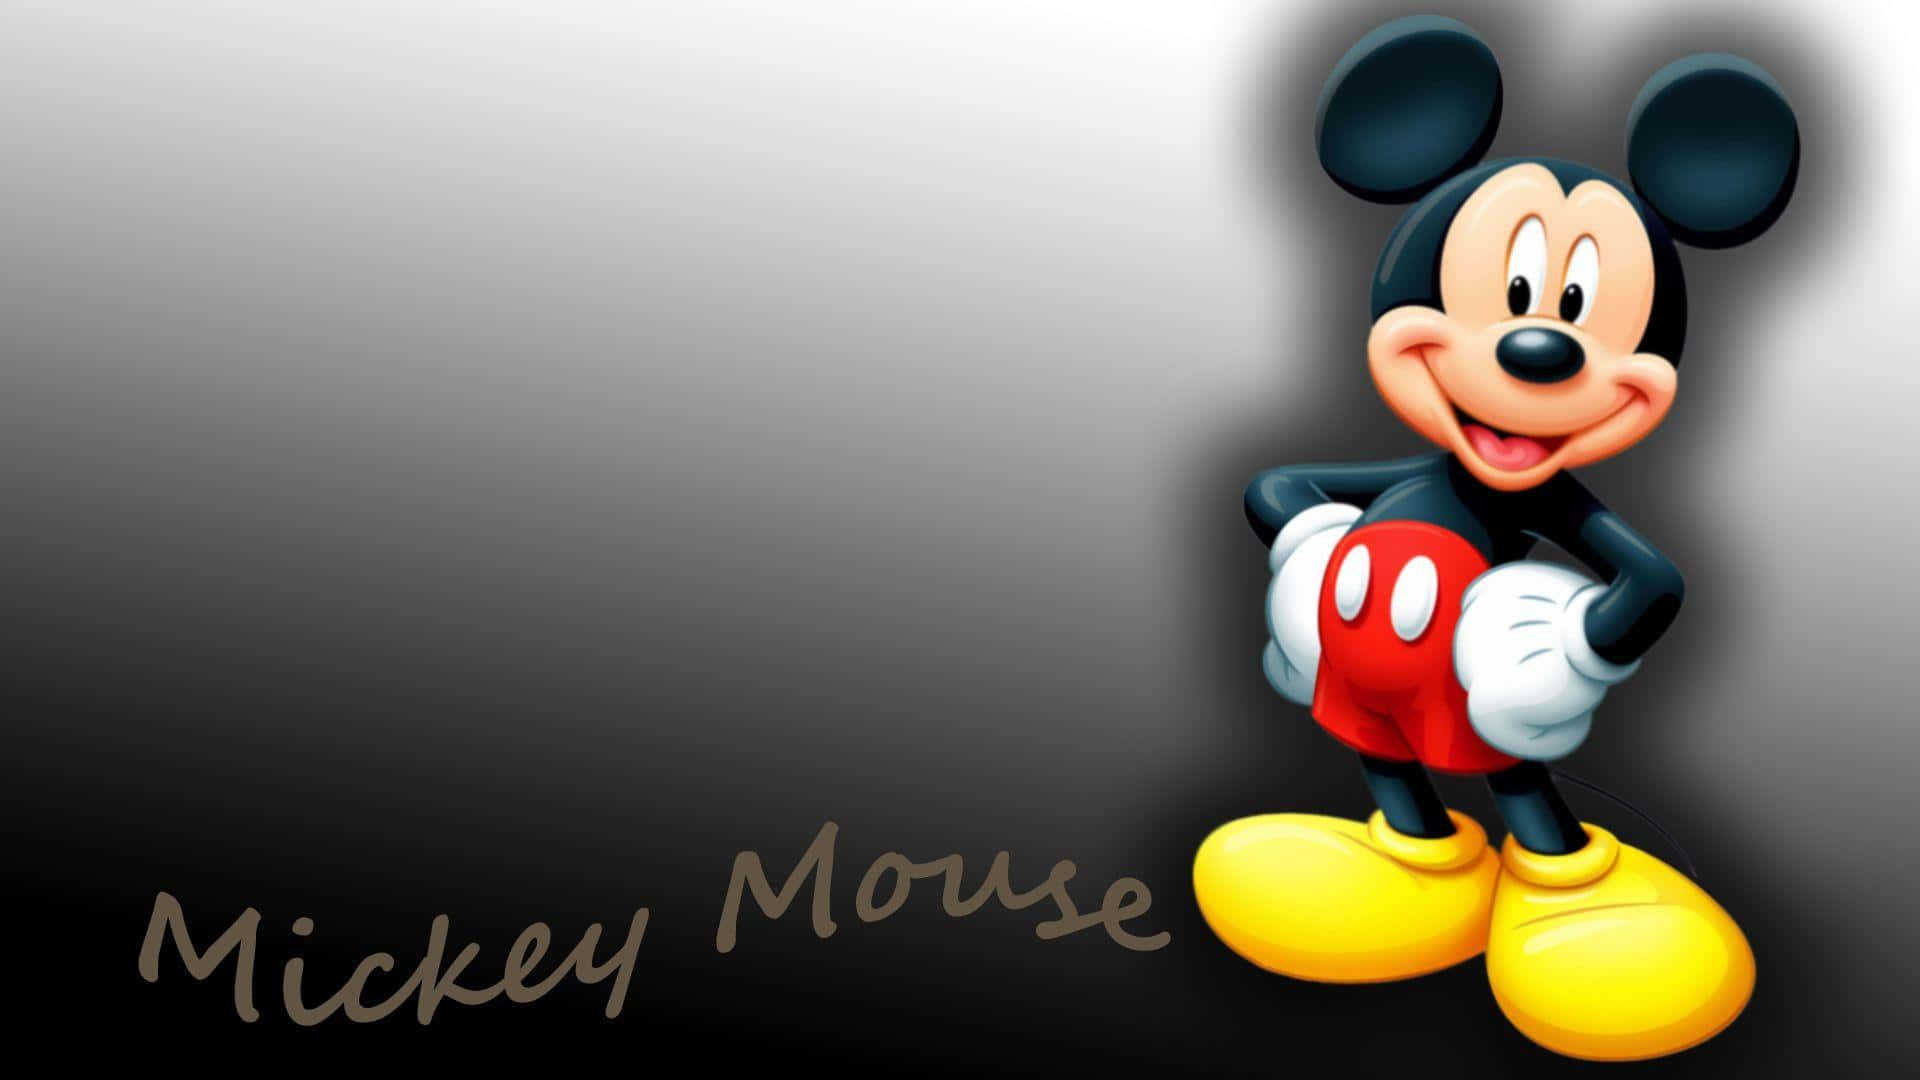 Enjoy the fun and joy of childhood with this Mickey Mouse desktop wallpaper. Wallpaper